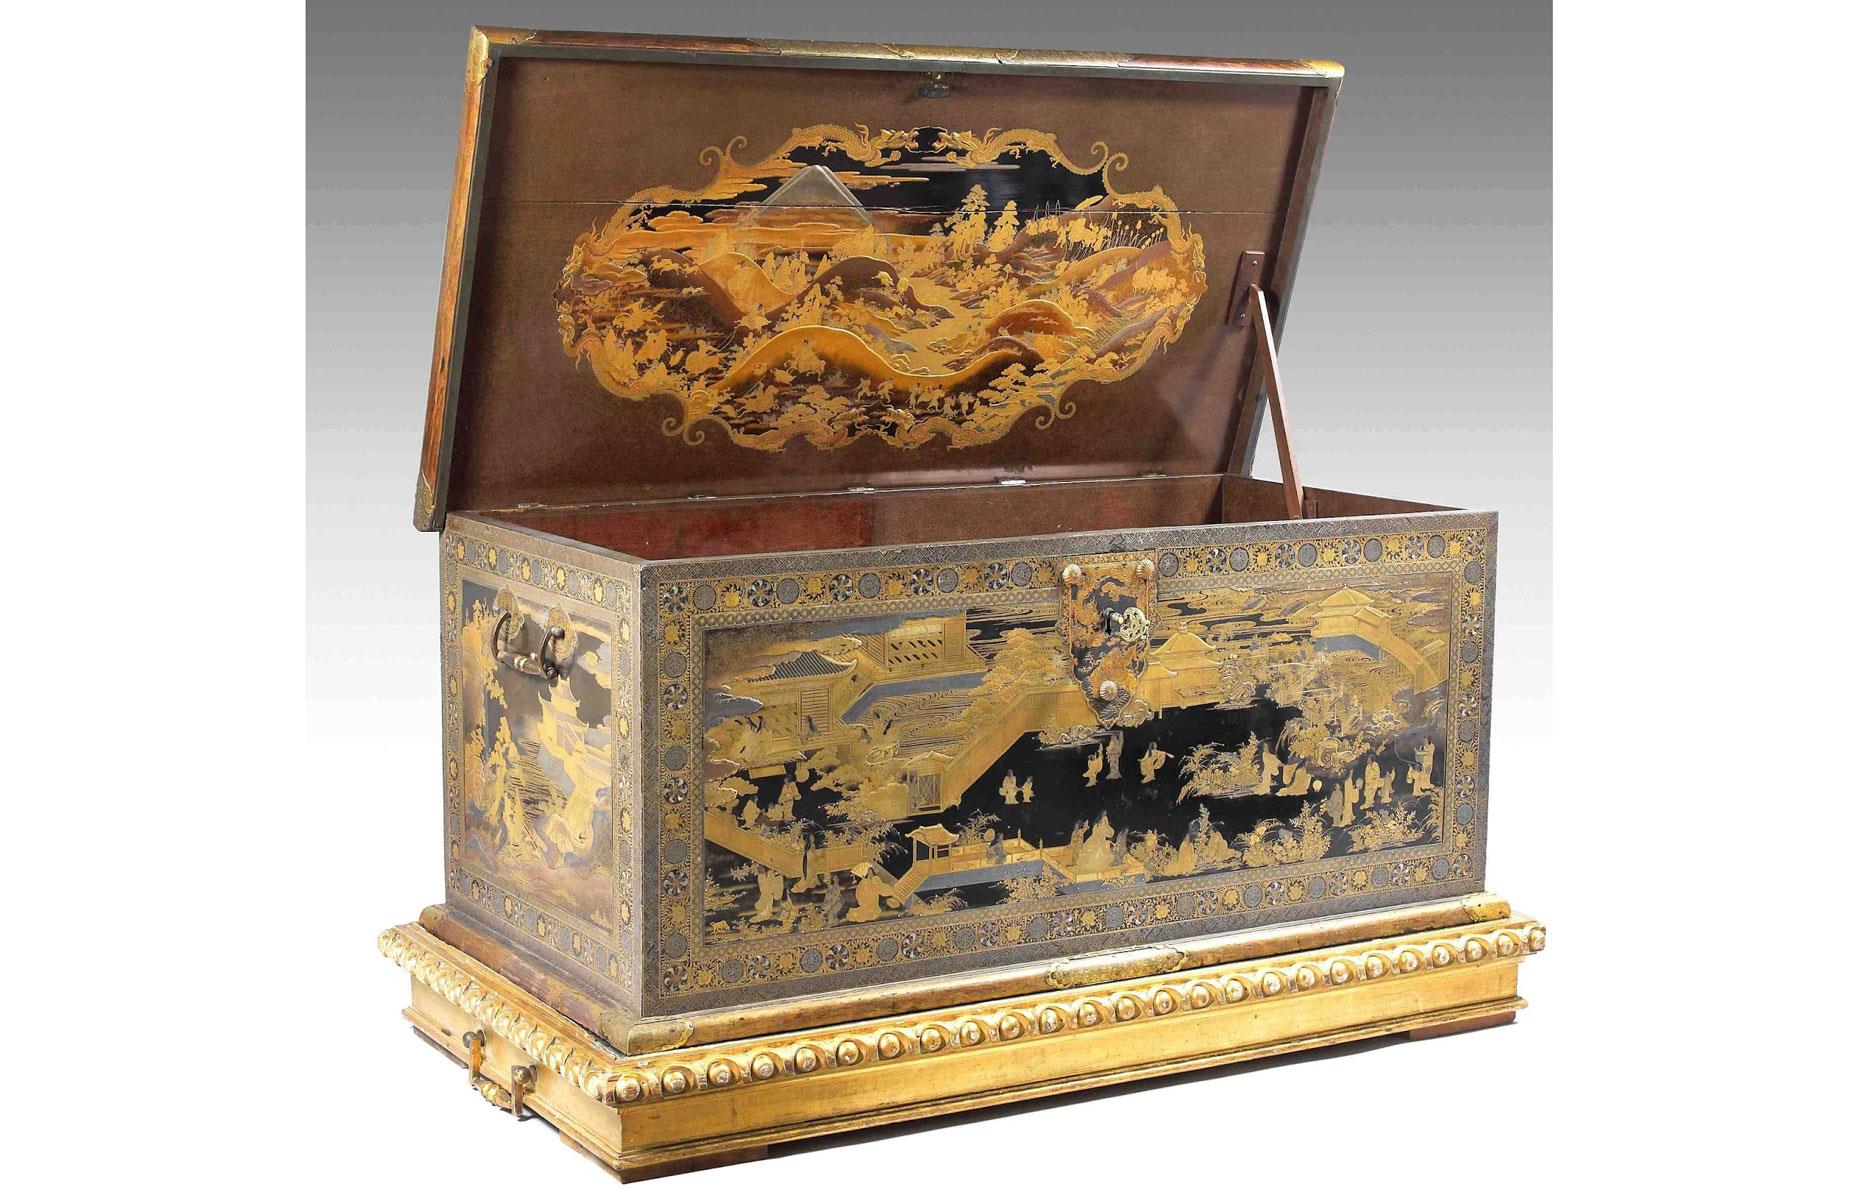 The museum-quality Japanese chest used as a TV stand: $7.6 million (£6.3m)